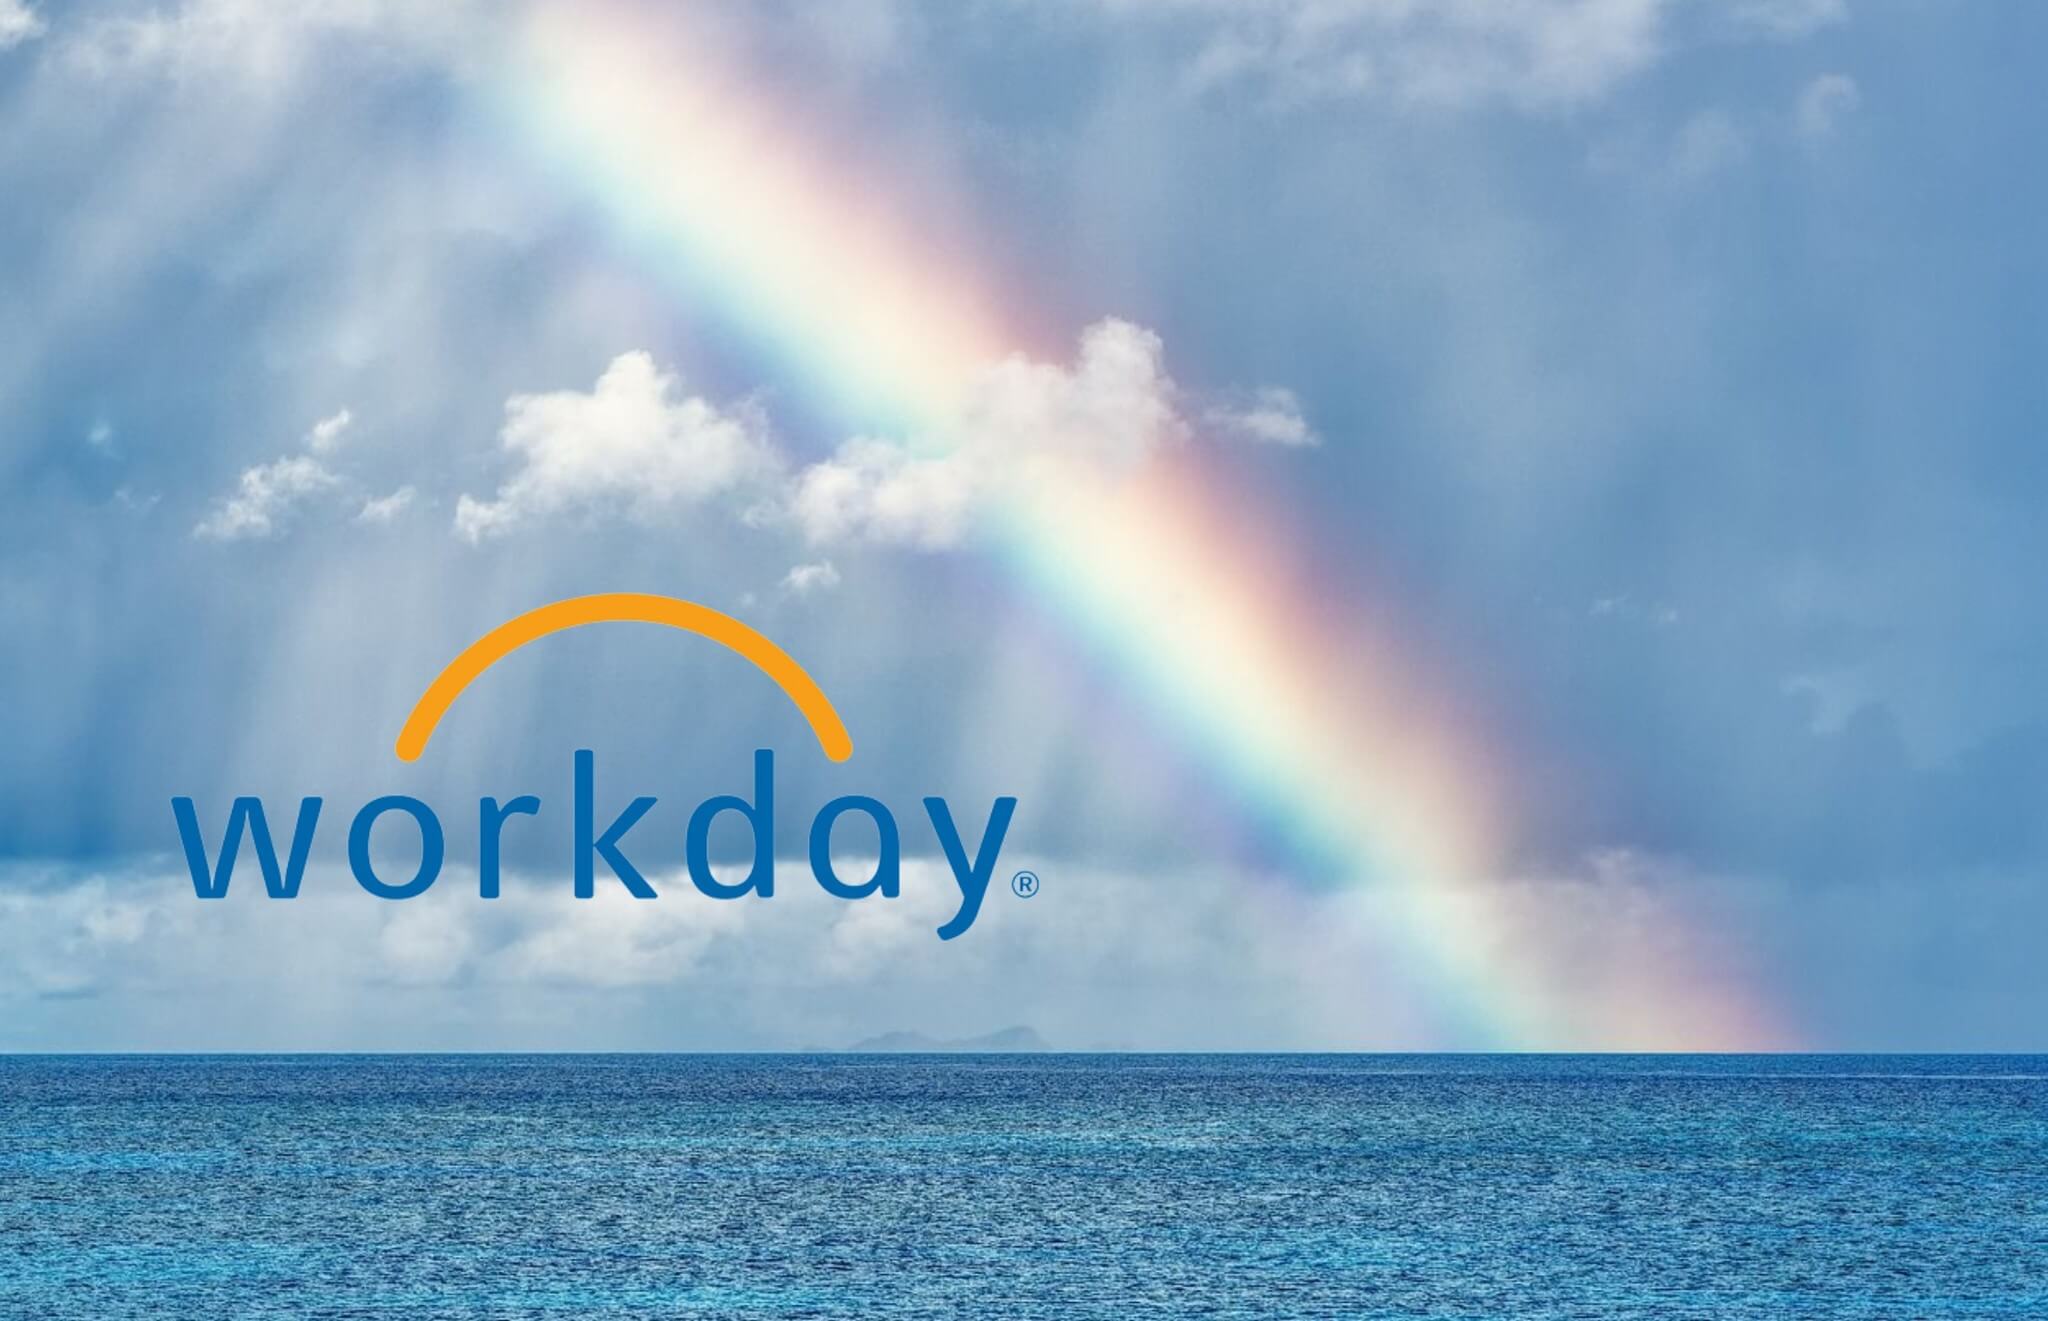 NASDAQ:WDAY Workday Stock - Strong Q2 23 Financial Results